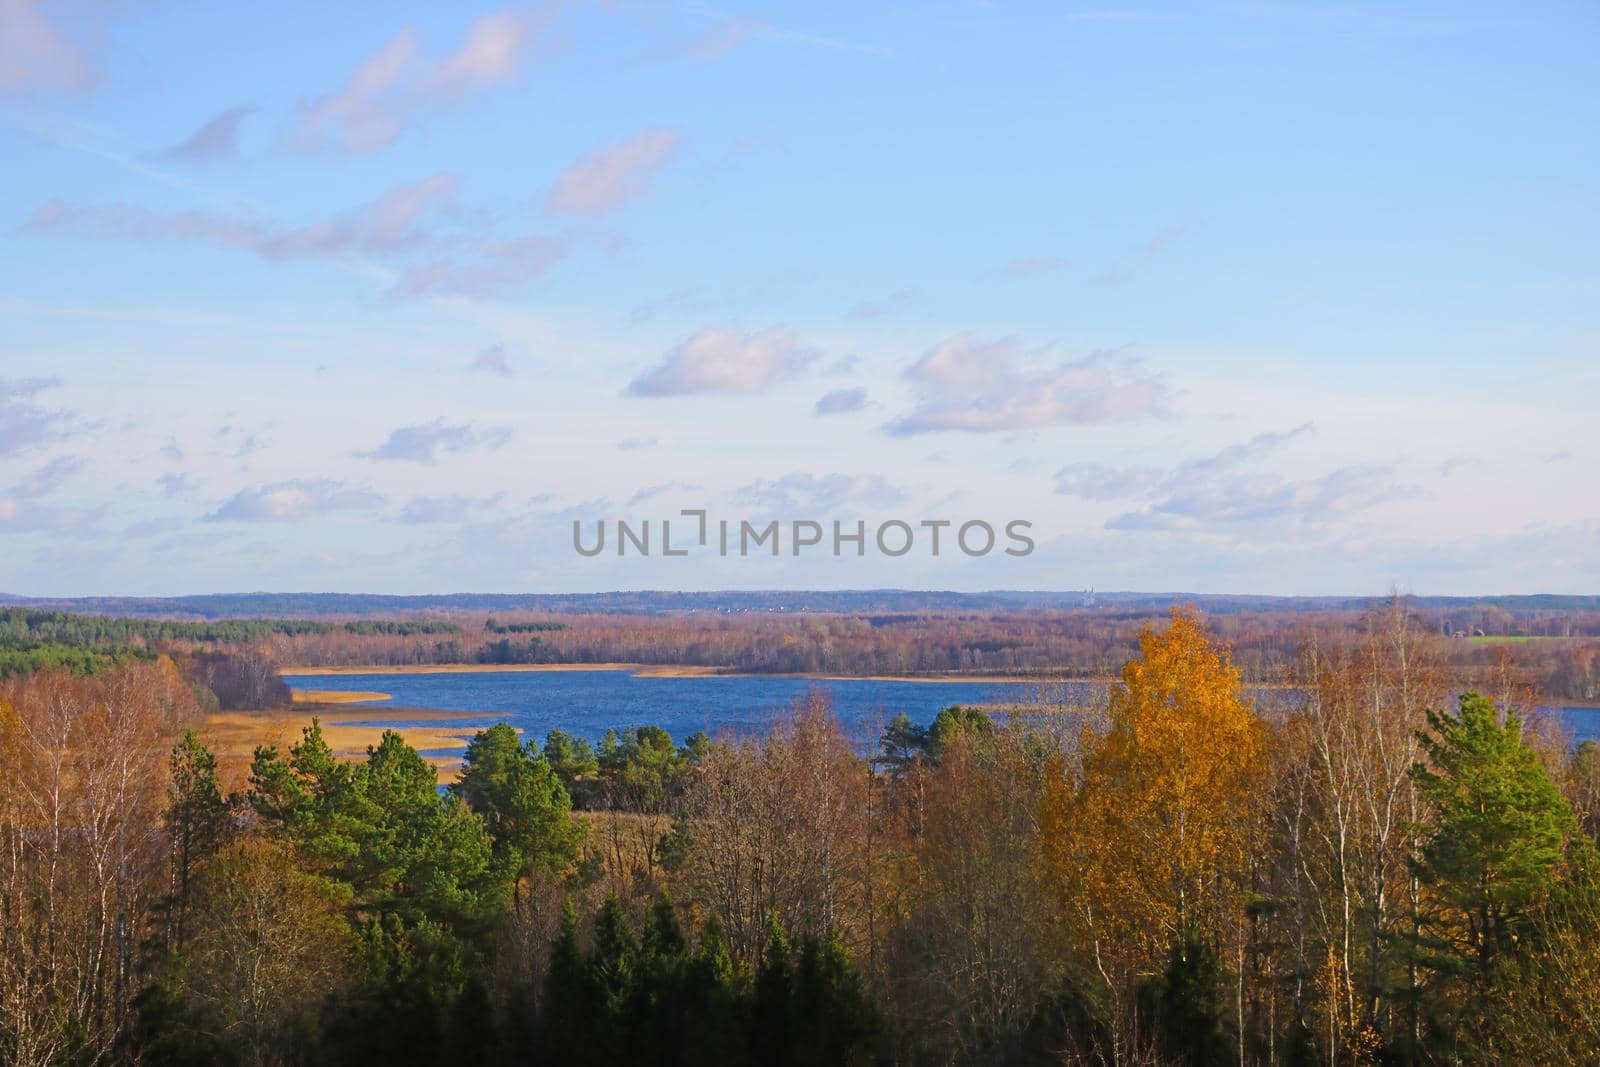 View from the height of the lake and forest in autumn. Out of focus, blurred